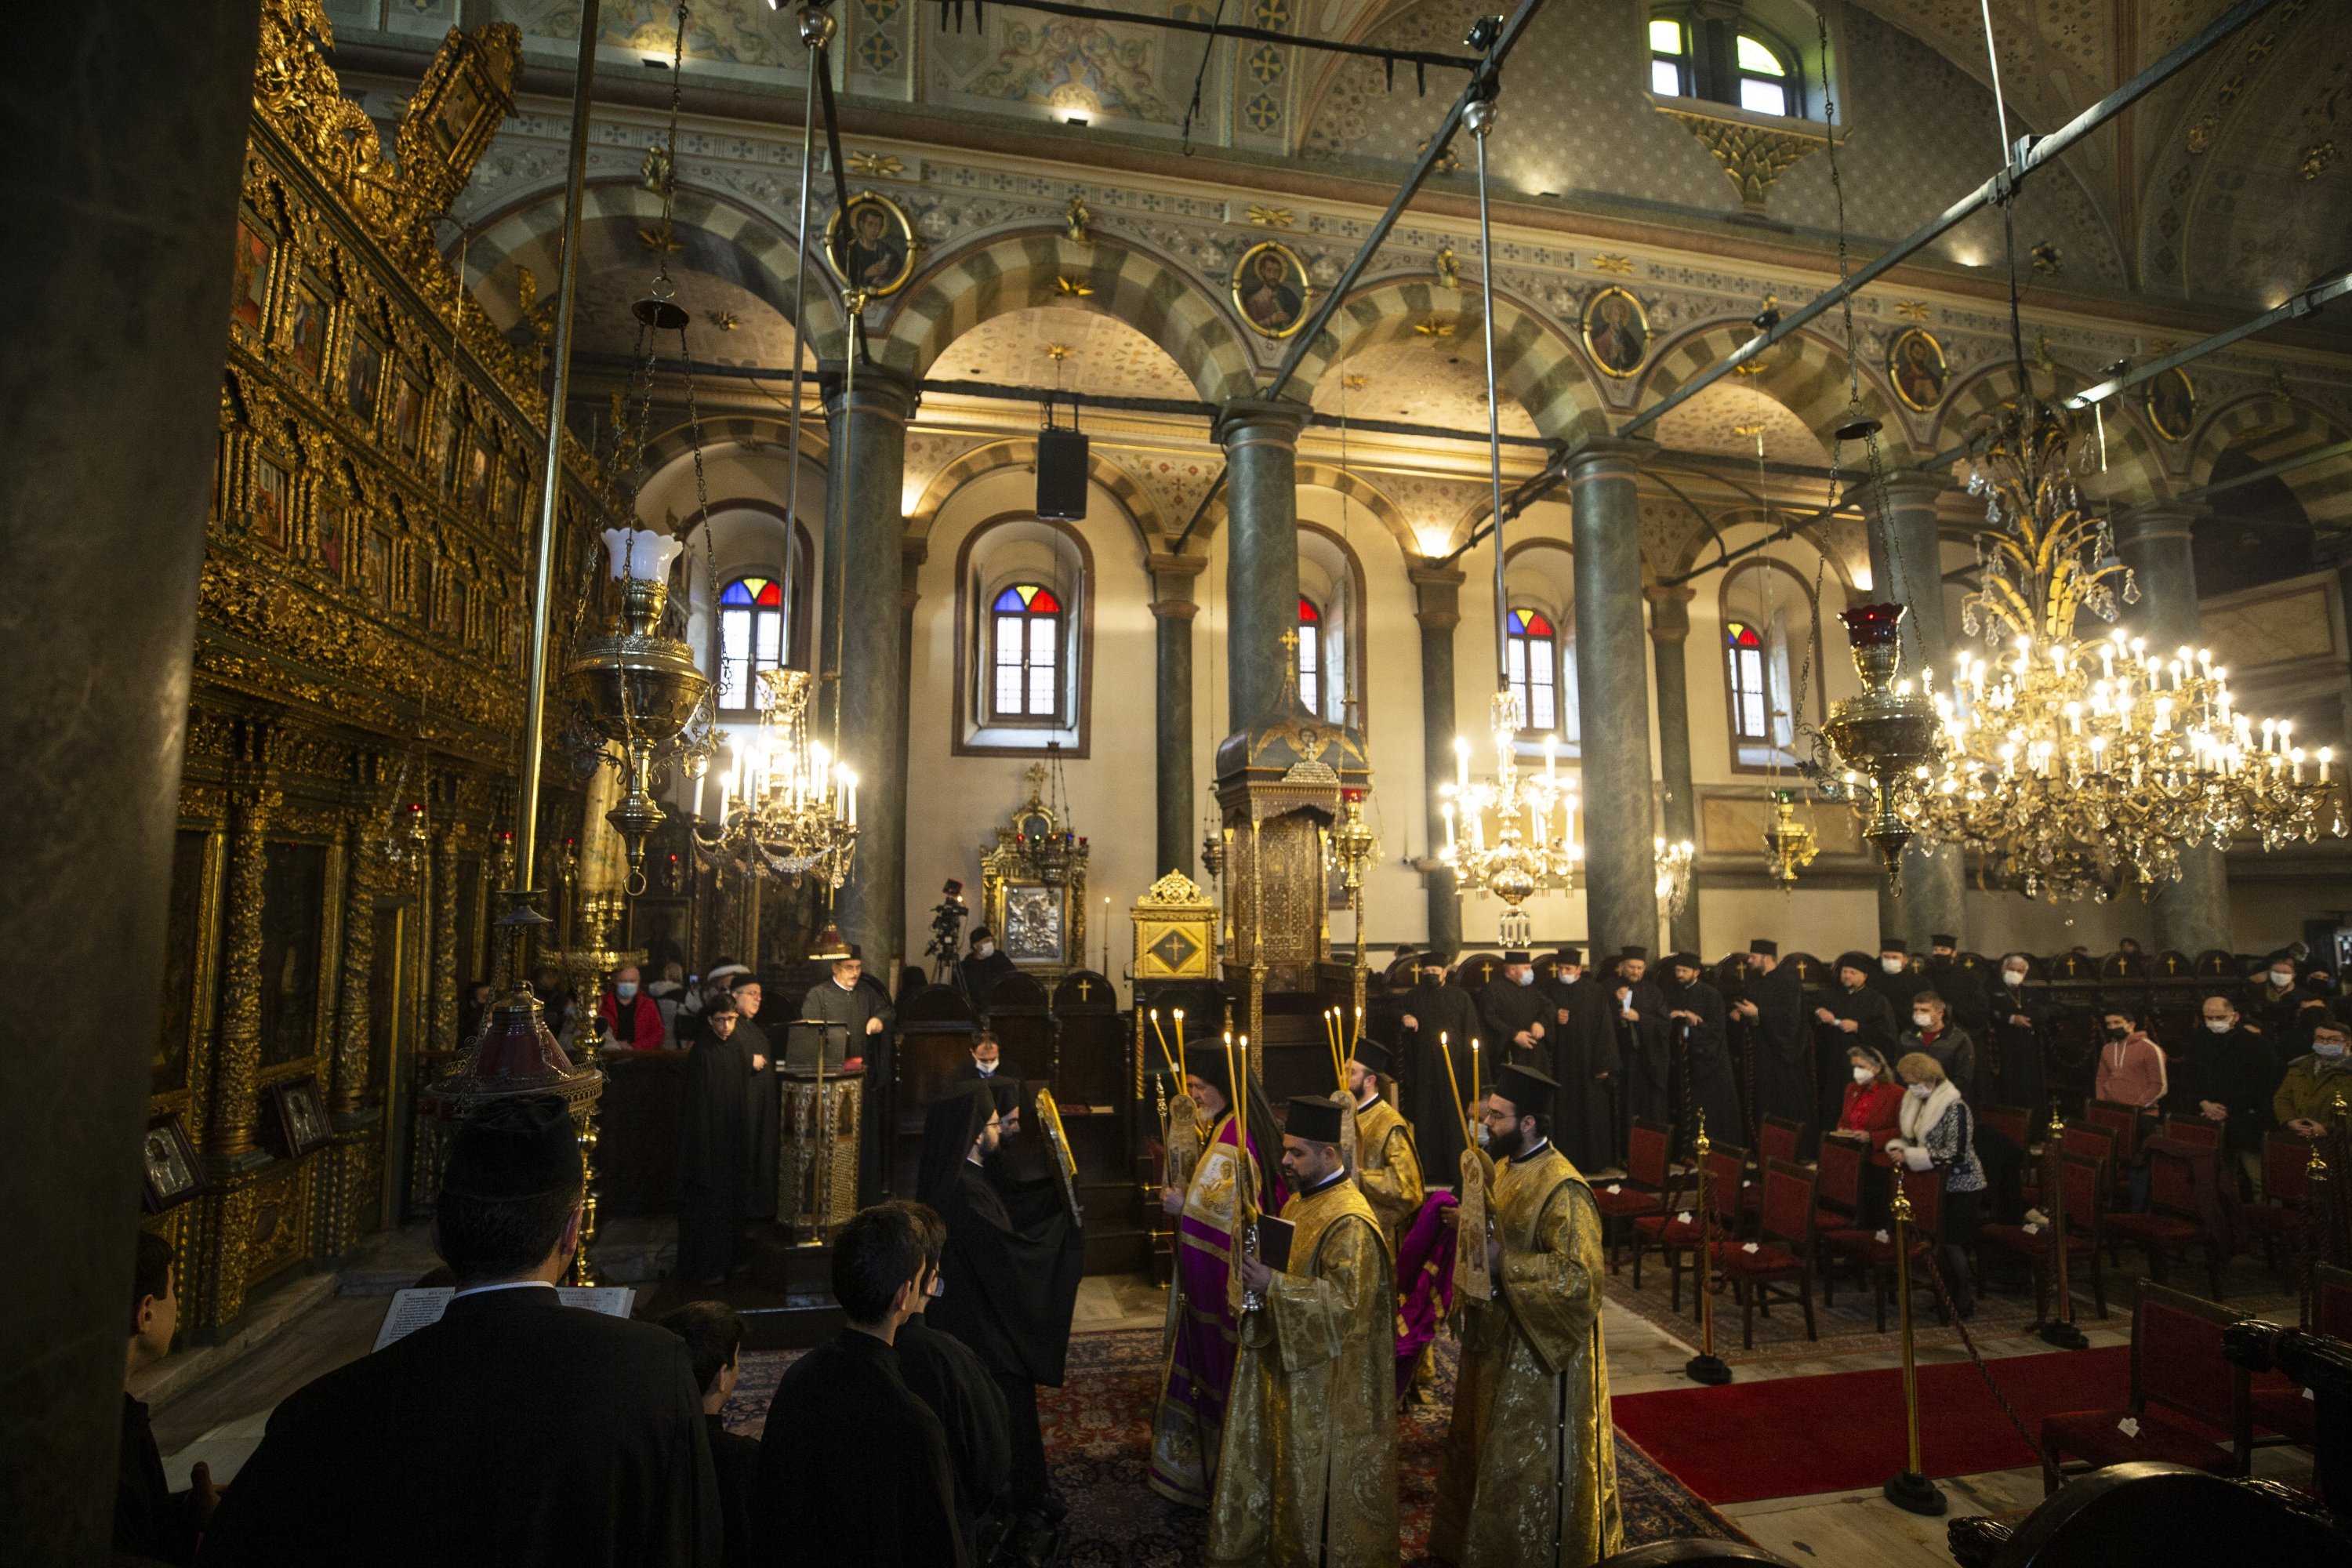 The Christmas service at St. George's Cathedral at Fener Greek Orthodox Patriarchate, in Fatih district, Istanbul, Turkey, Dec. 25, 2021. (AA Photo)